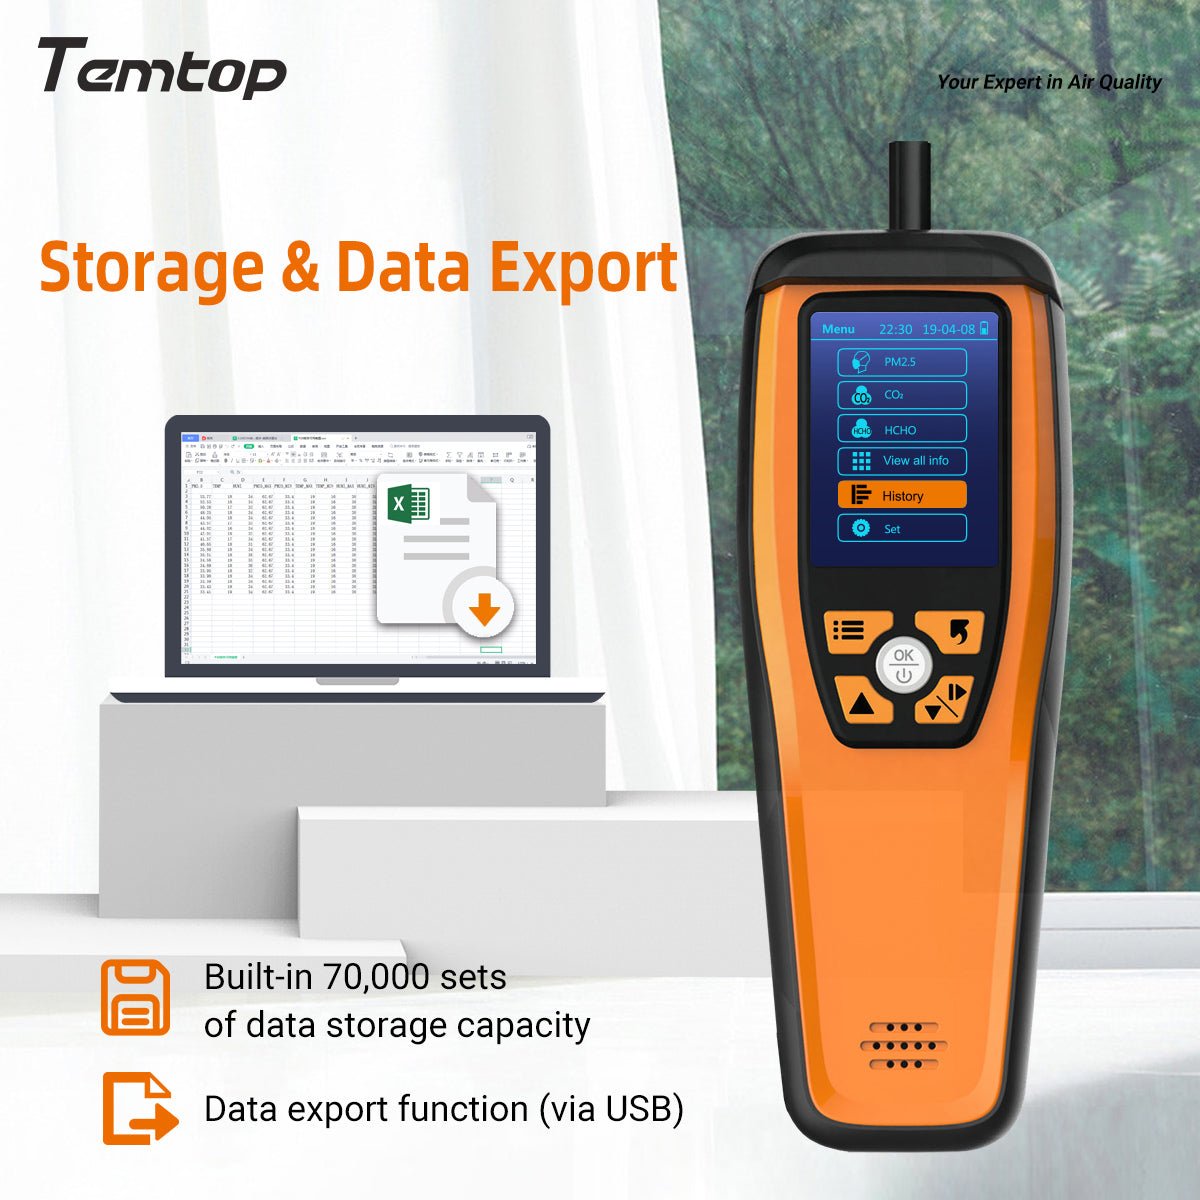 Temtop M2000C CO2 Air Quality Monitor Detects CO2 PM2.5 PM10 and Temperature and humiditiy with easy Calibration - Temtop